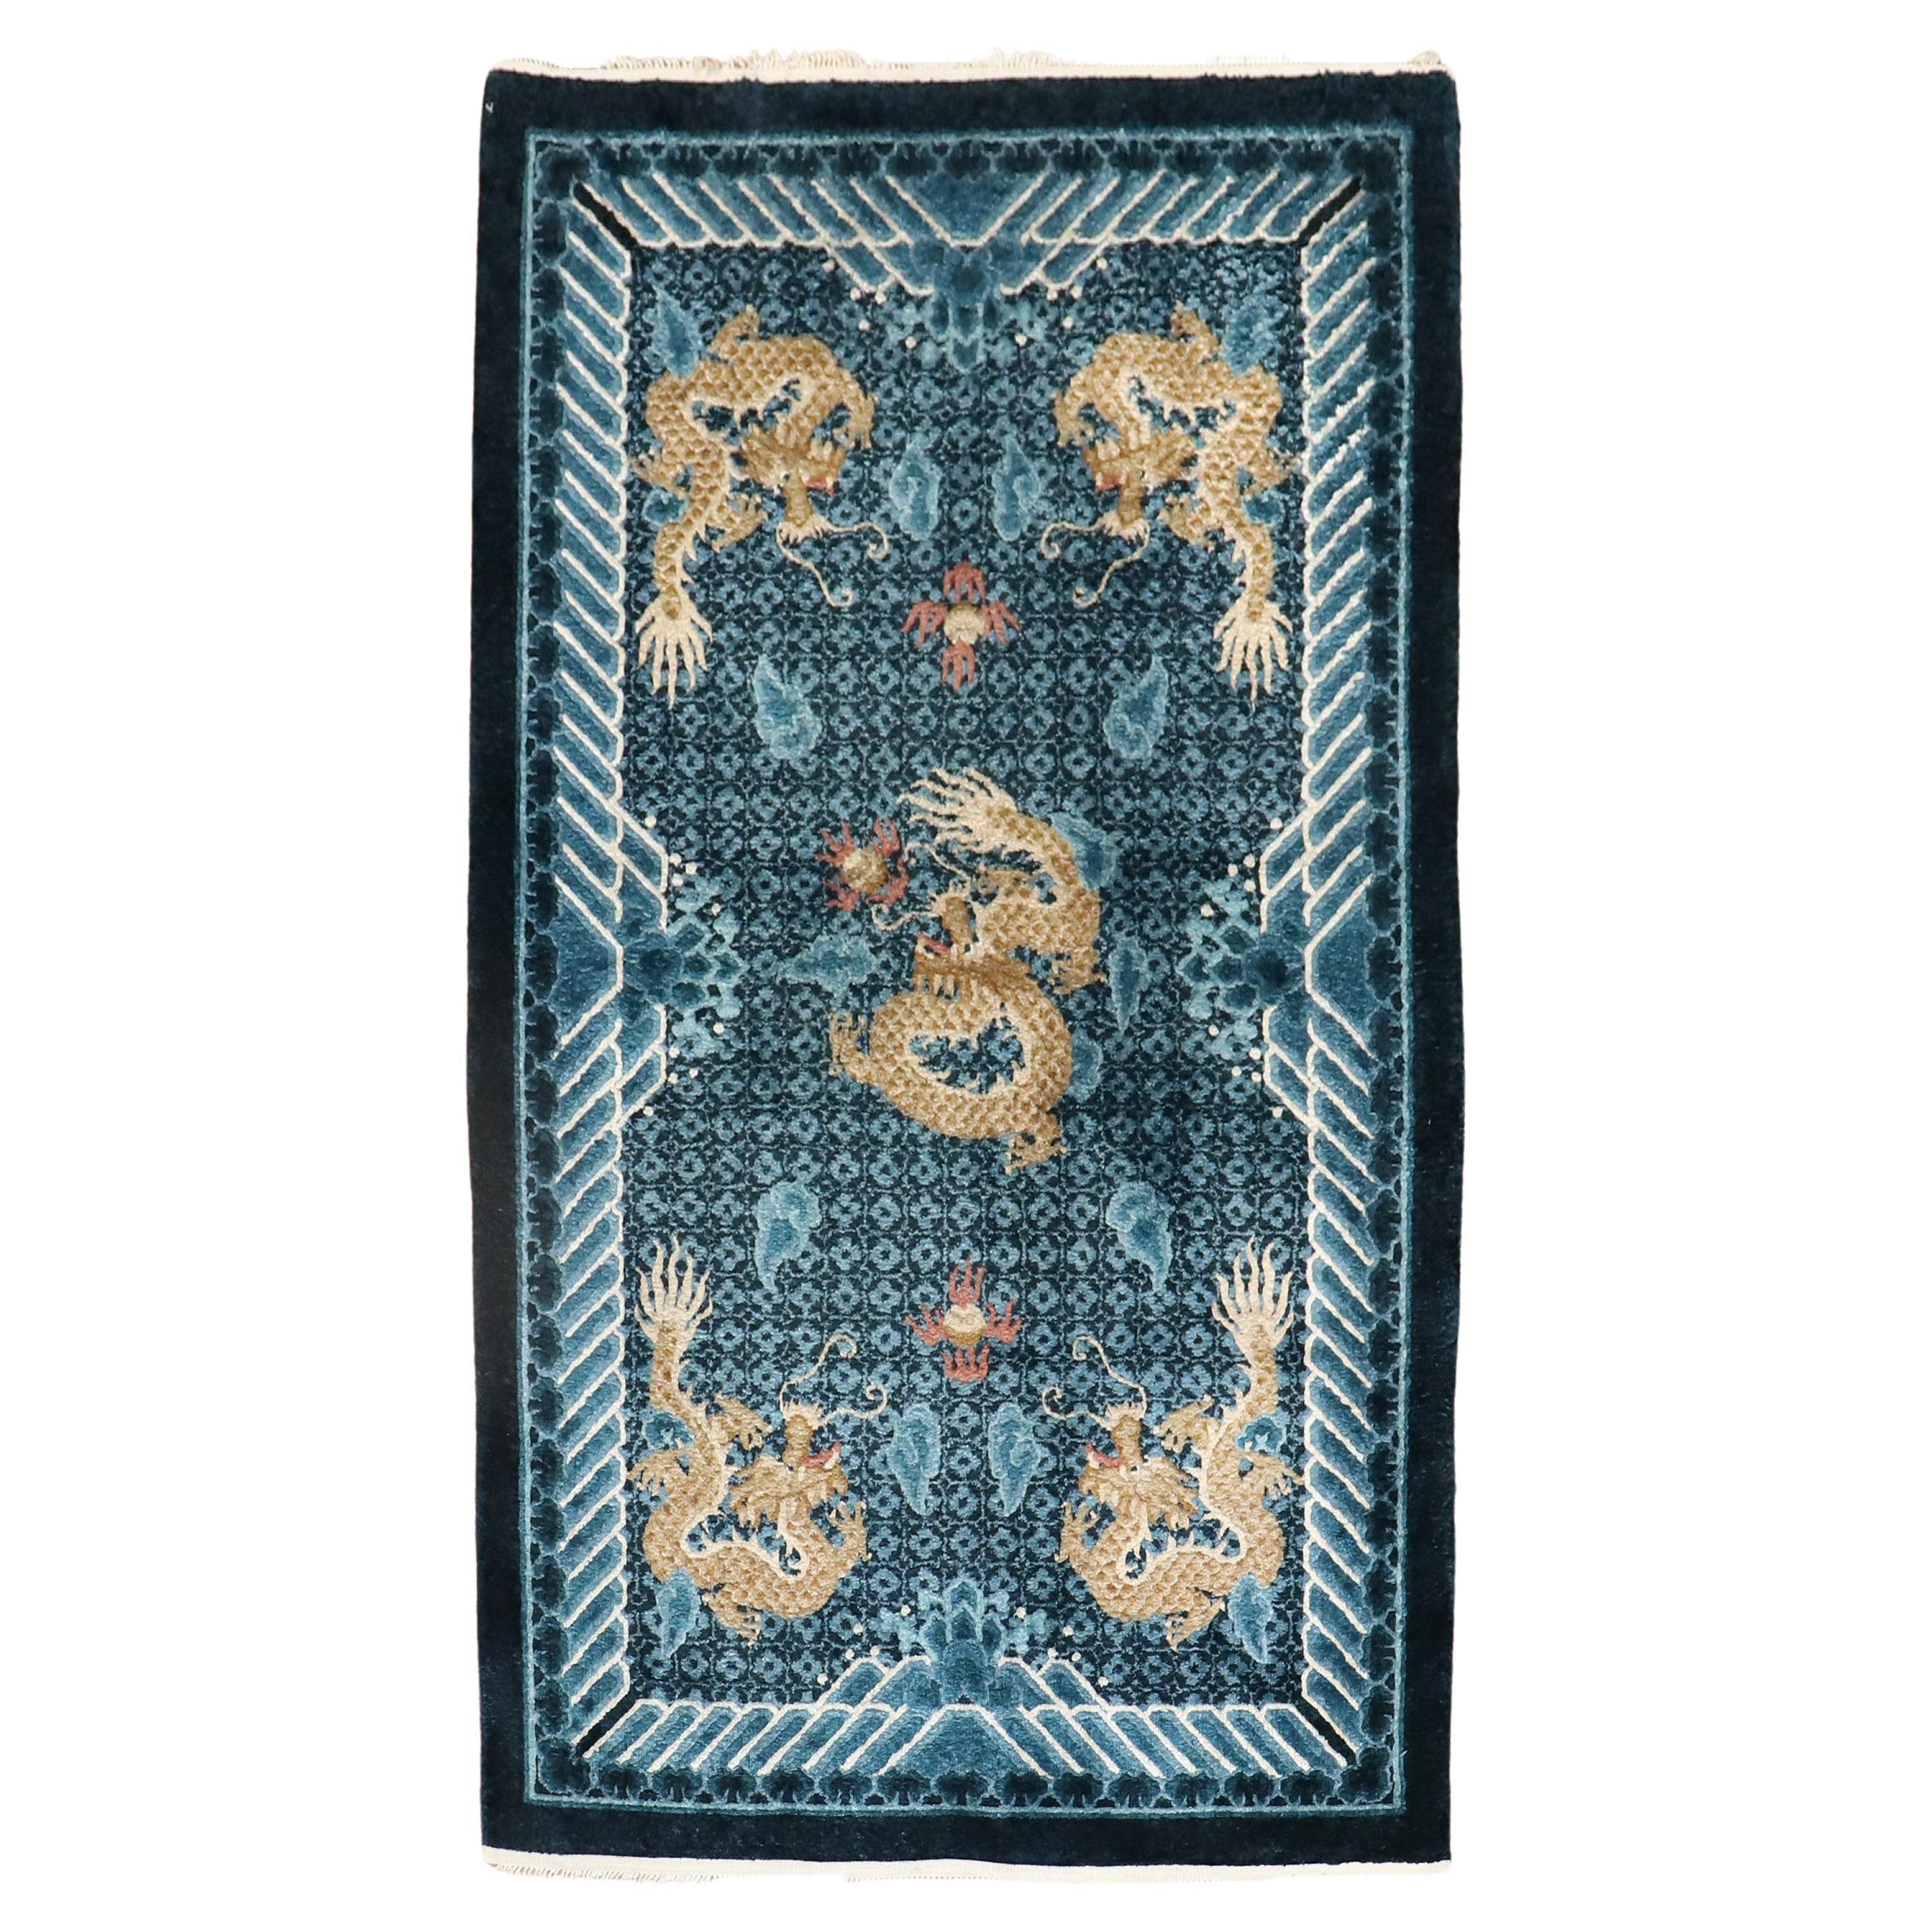 Chinese Silk Scatter Dragon Rug